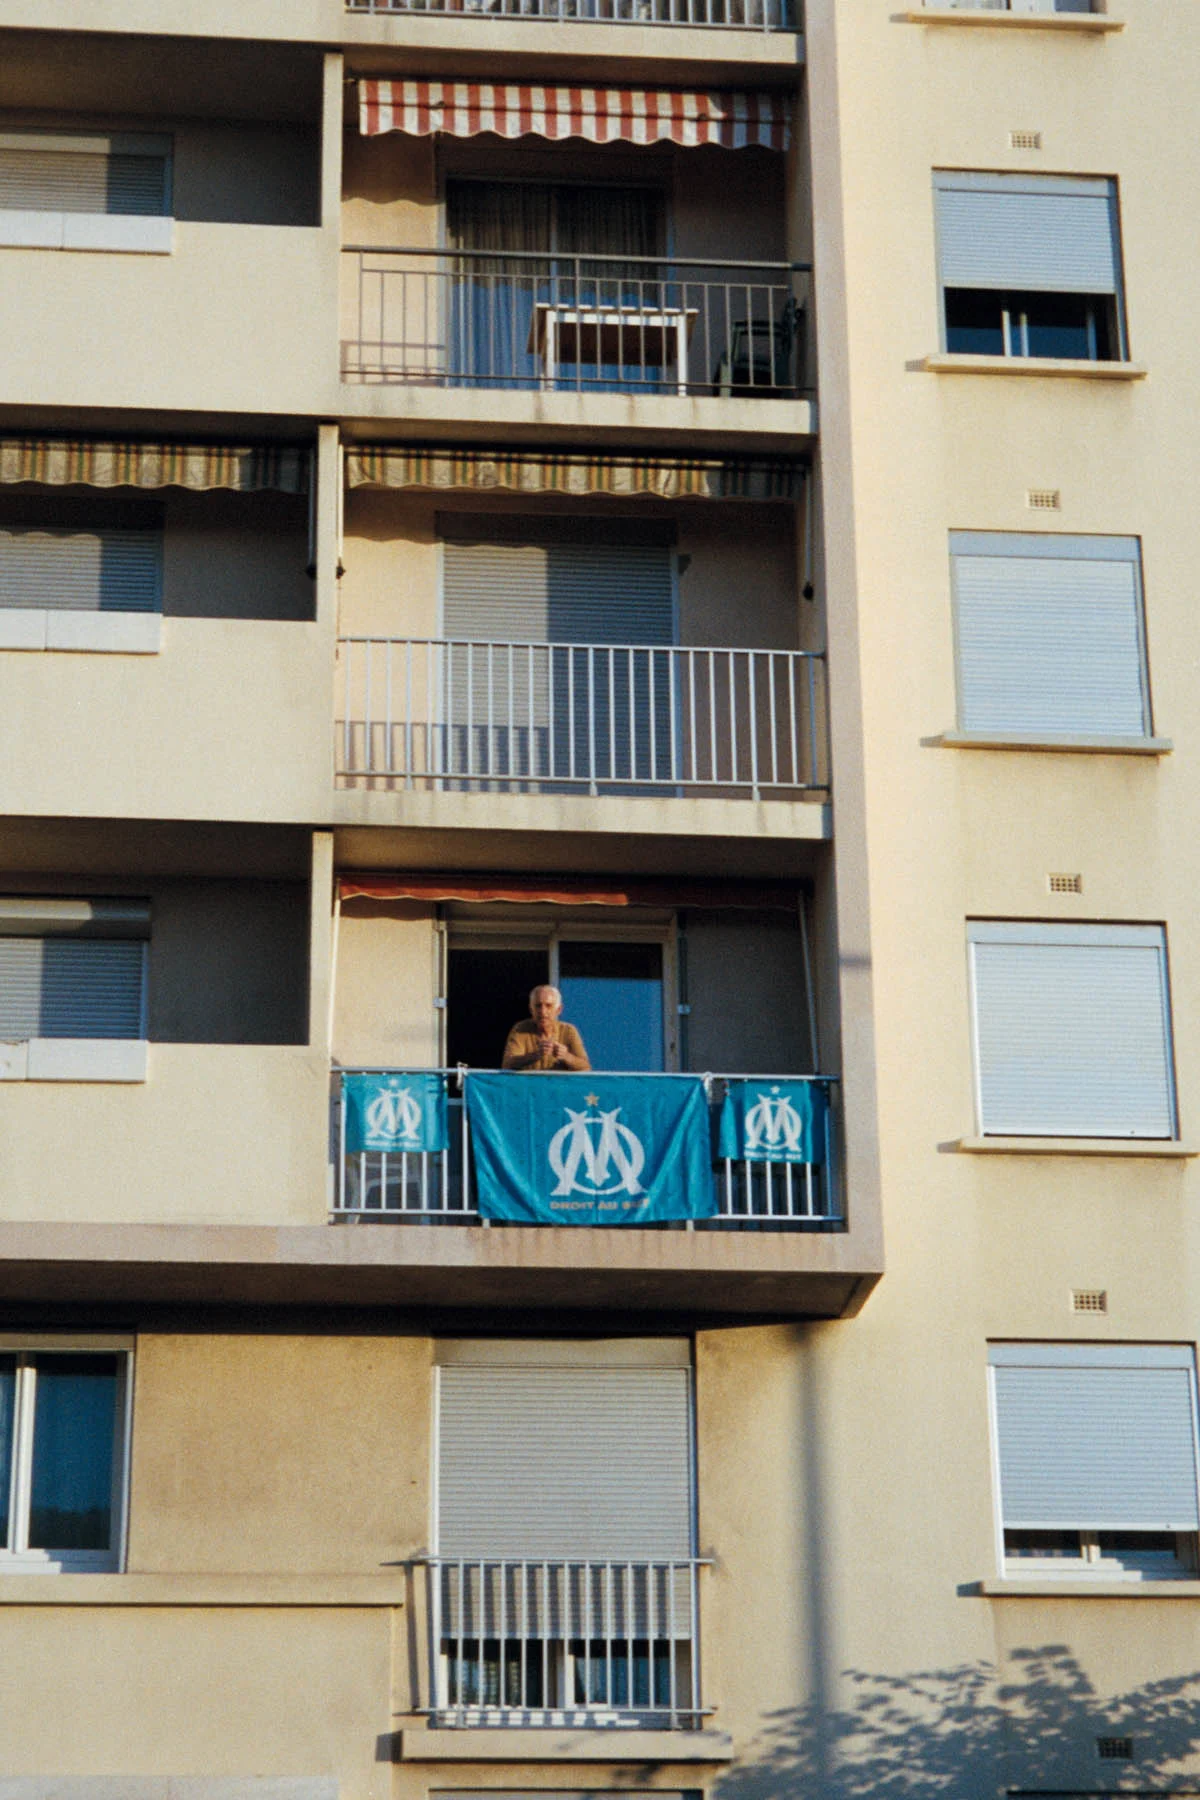 A photograph of an elderly man leaning on the terrace of his apartment hanging flags that bear the logo of Marseille football club